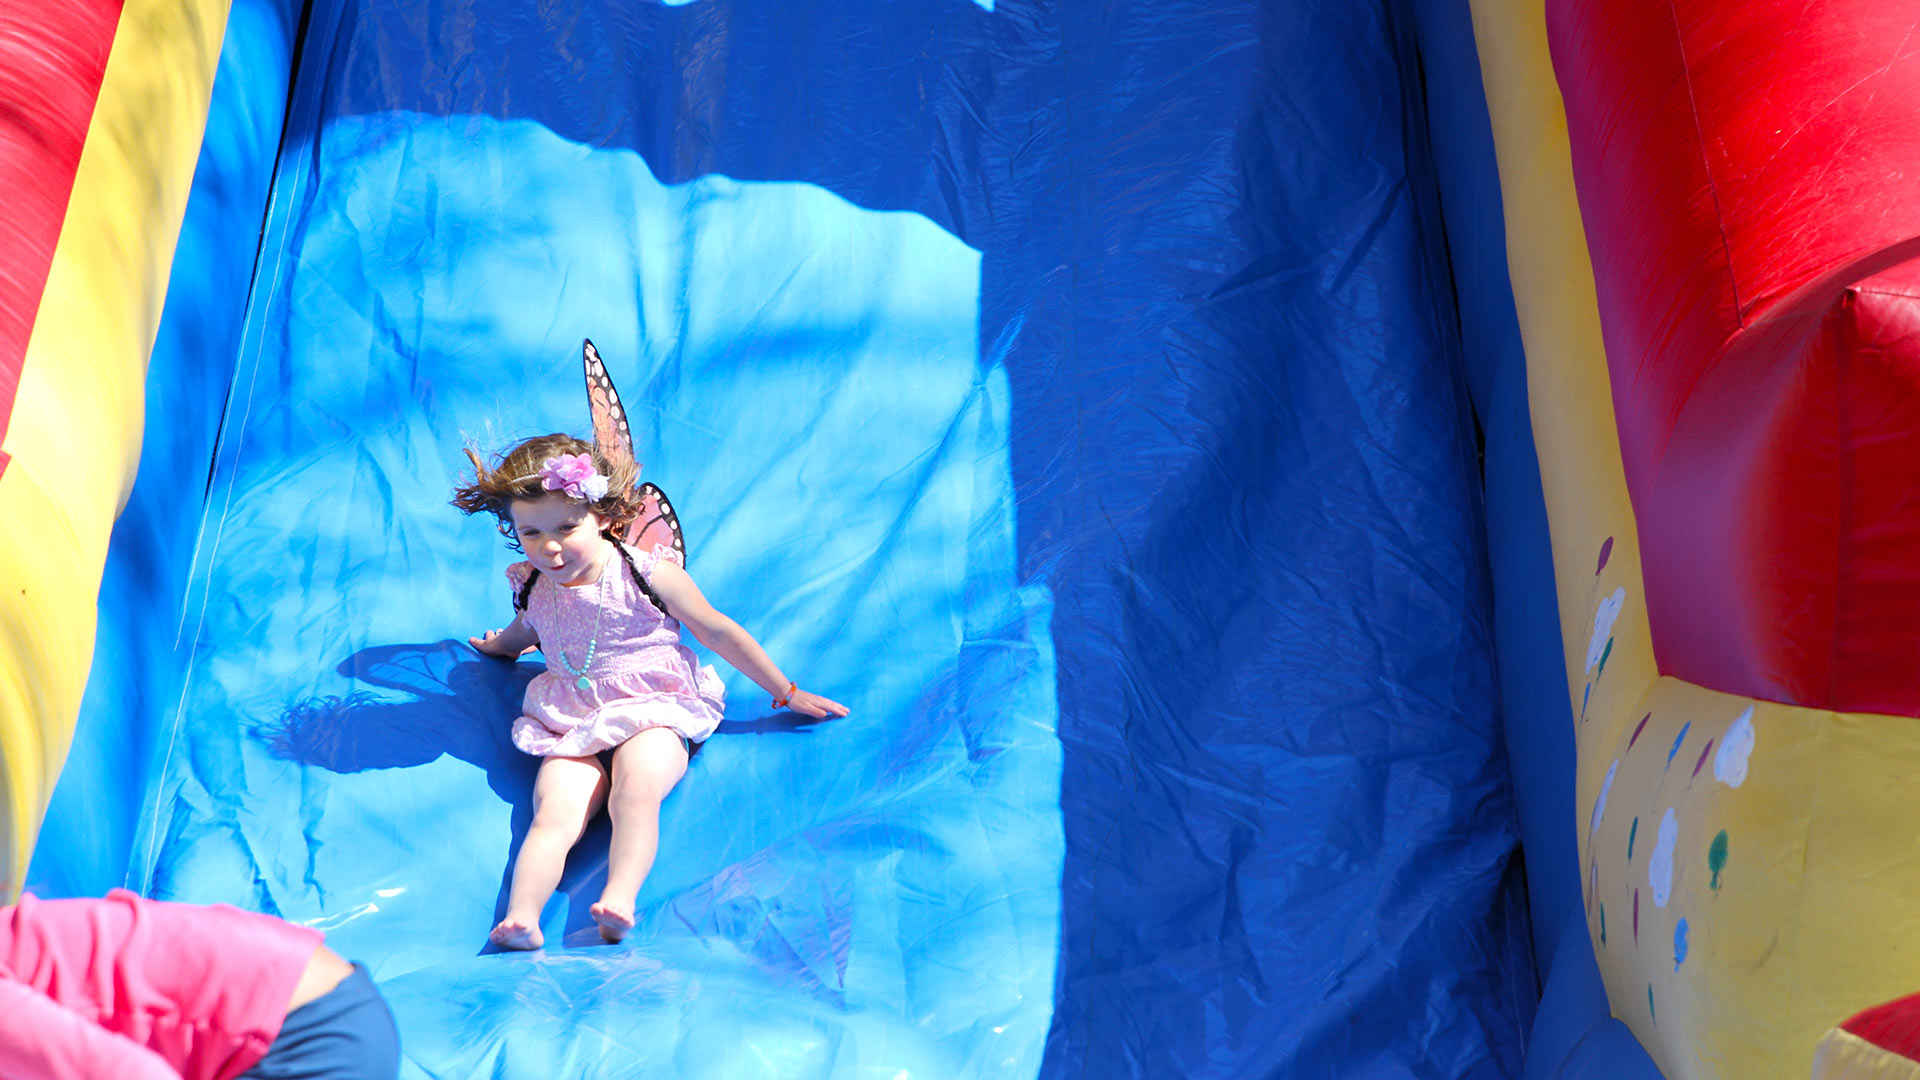 The Community Celebration included inflatables for younger family members.